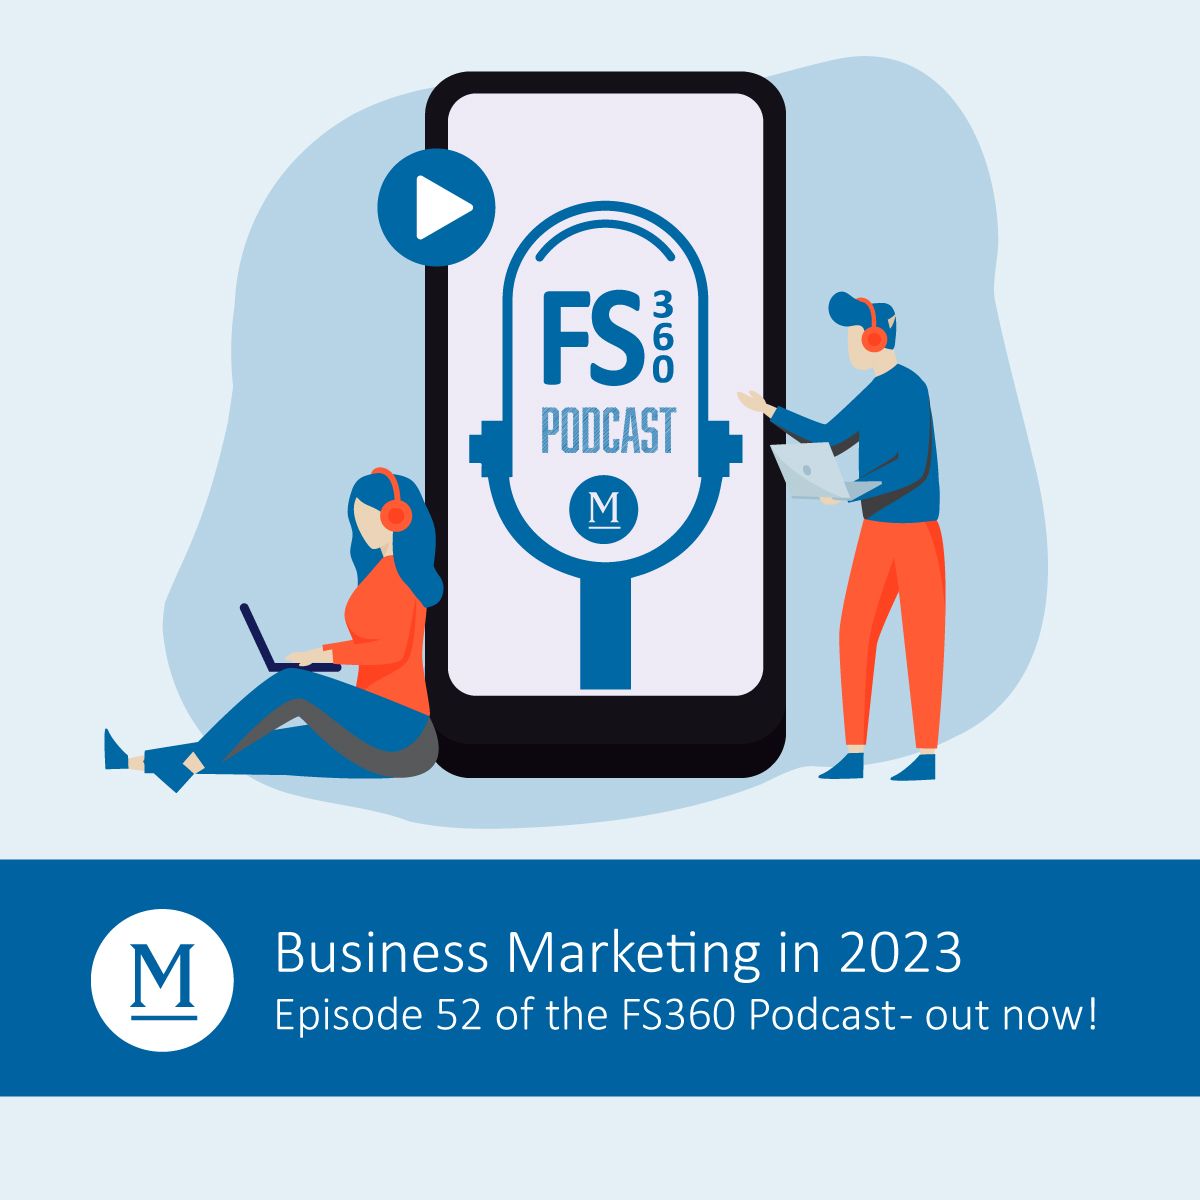 Mulcahy & Co Podcast, business marketing in 2023